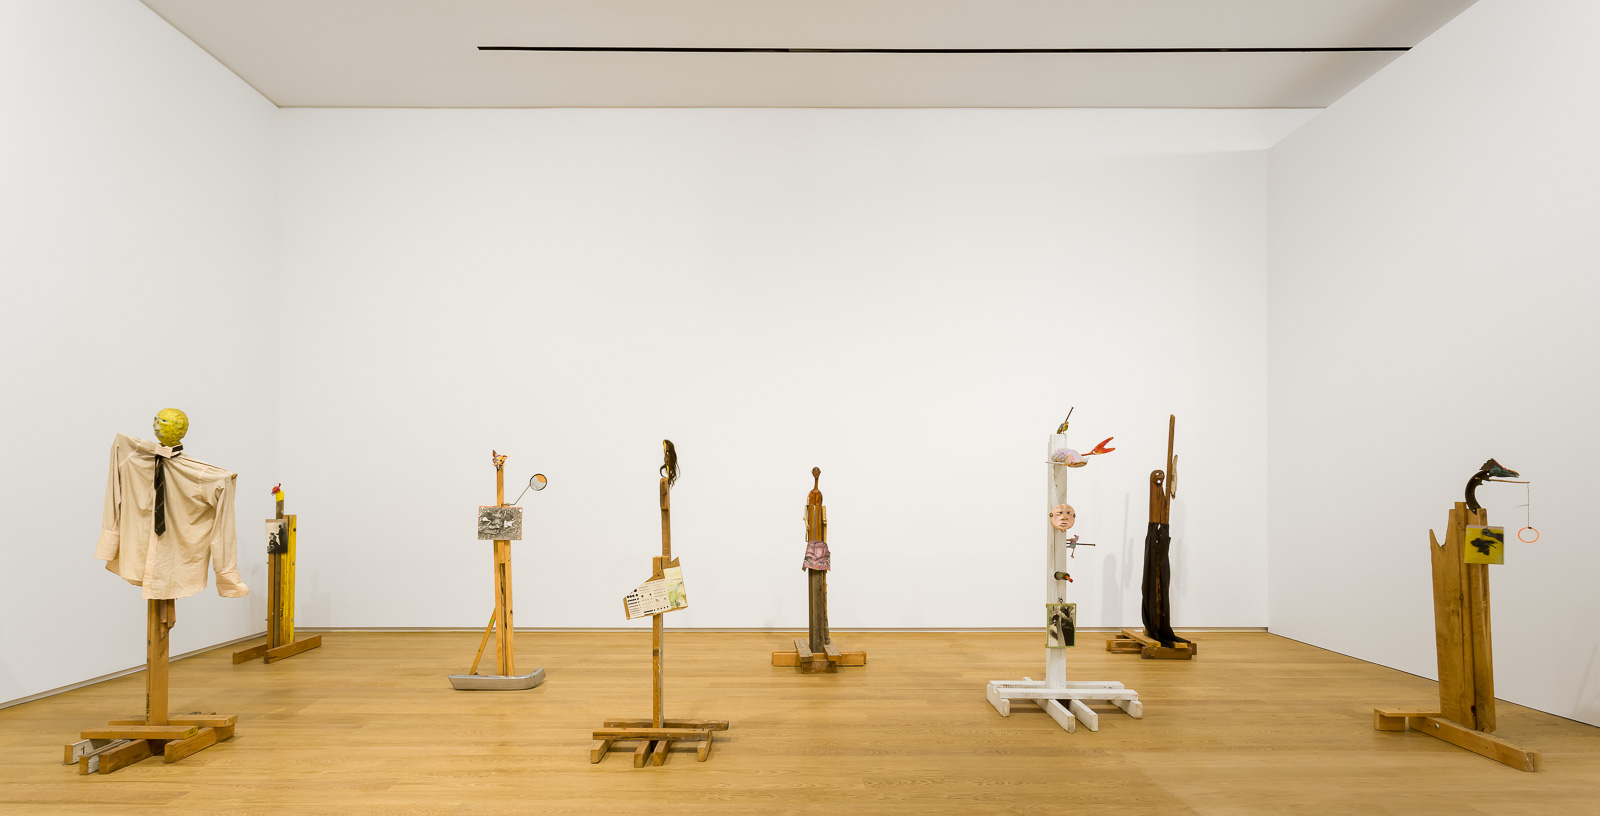 Jimmie Durham, At the Center of the World, Installation view, Remai Modern. Photo: Blaine Campbell